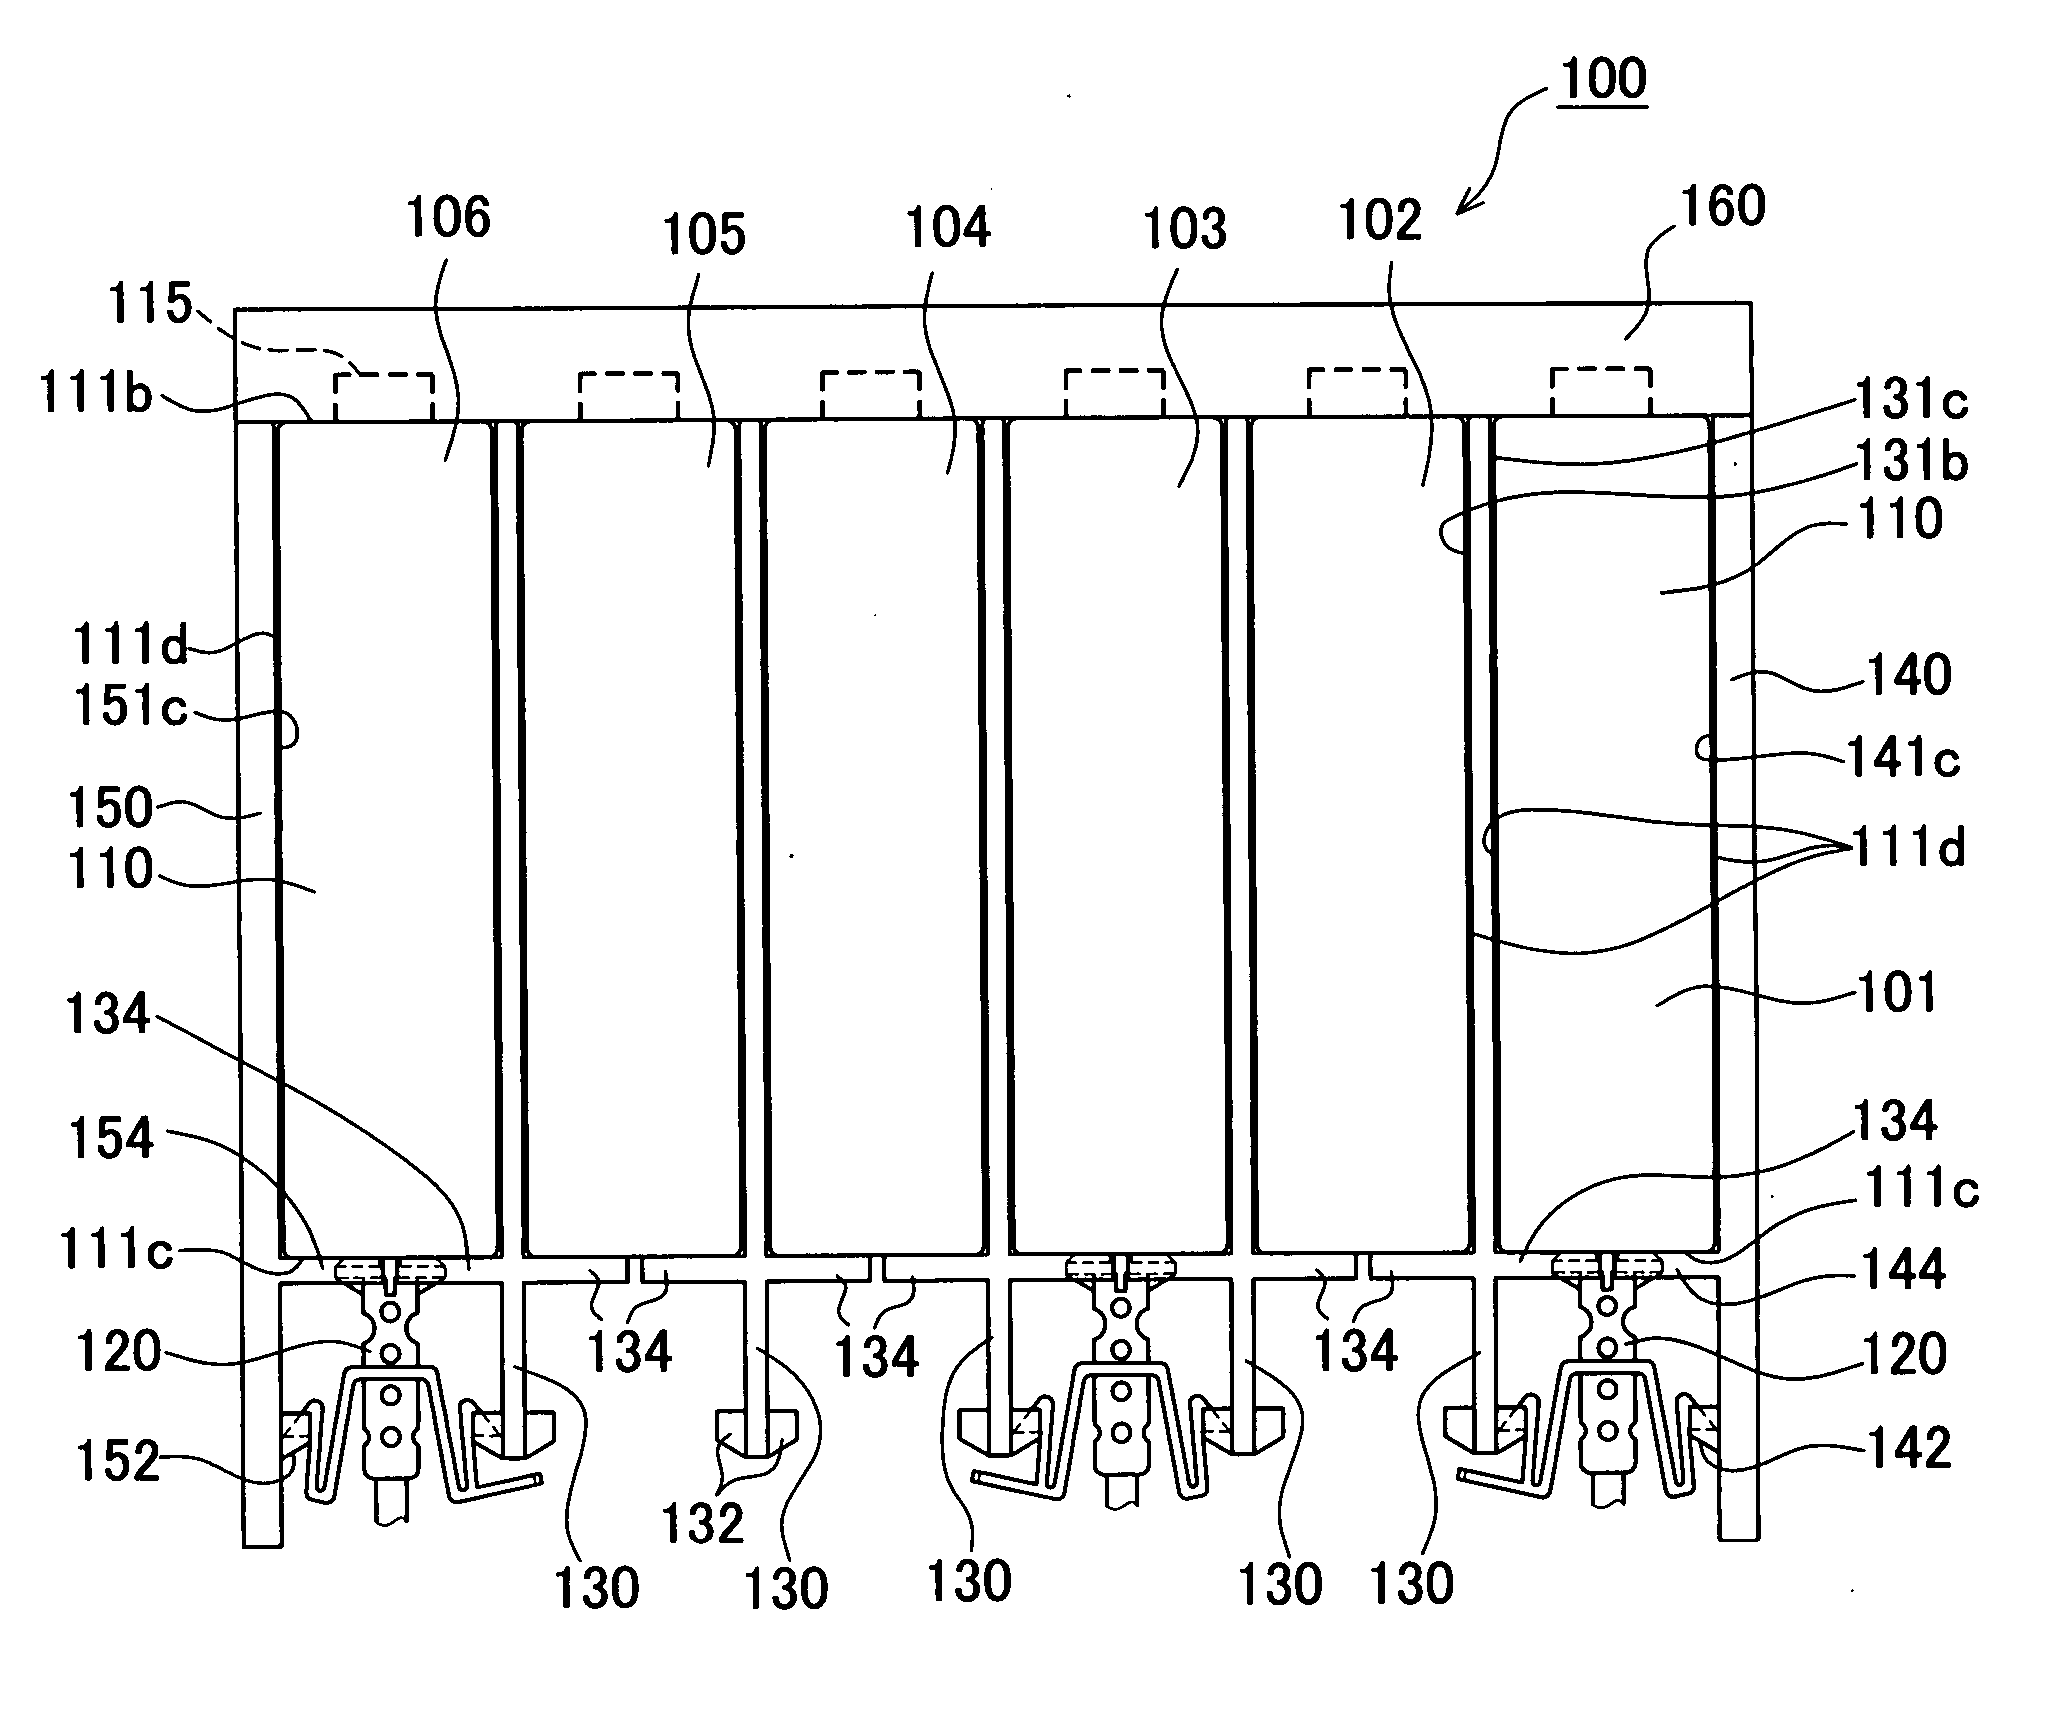 Secondary battery structure